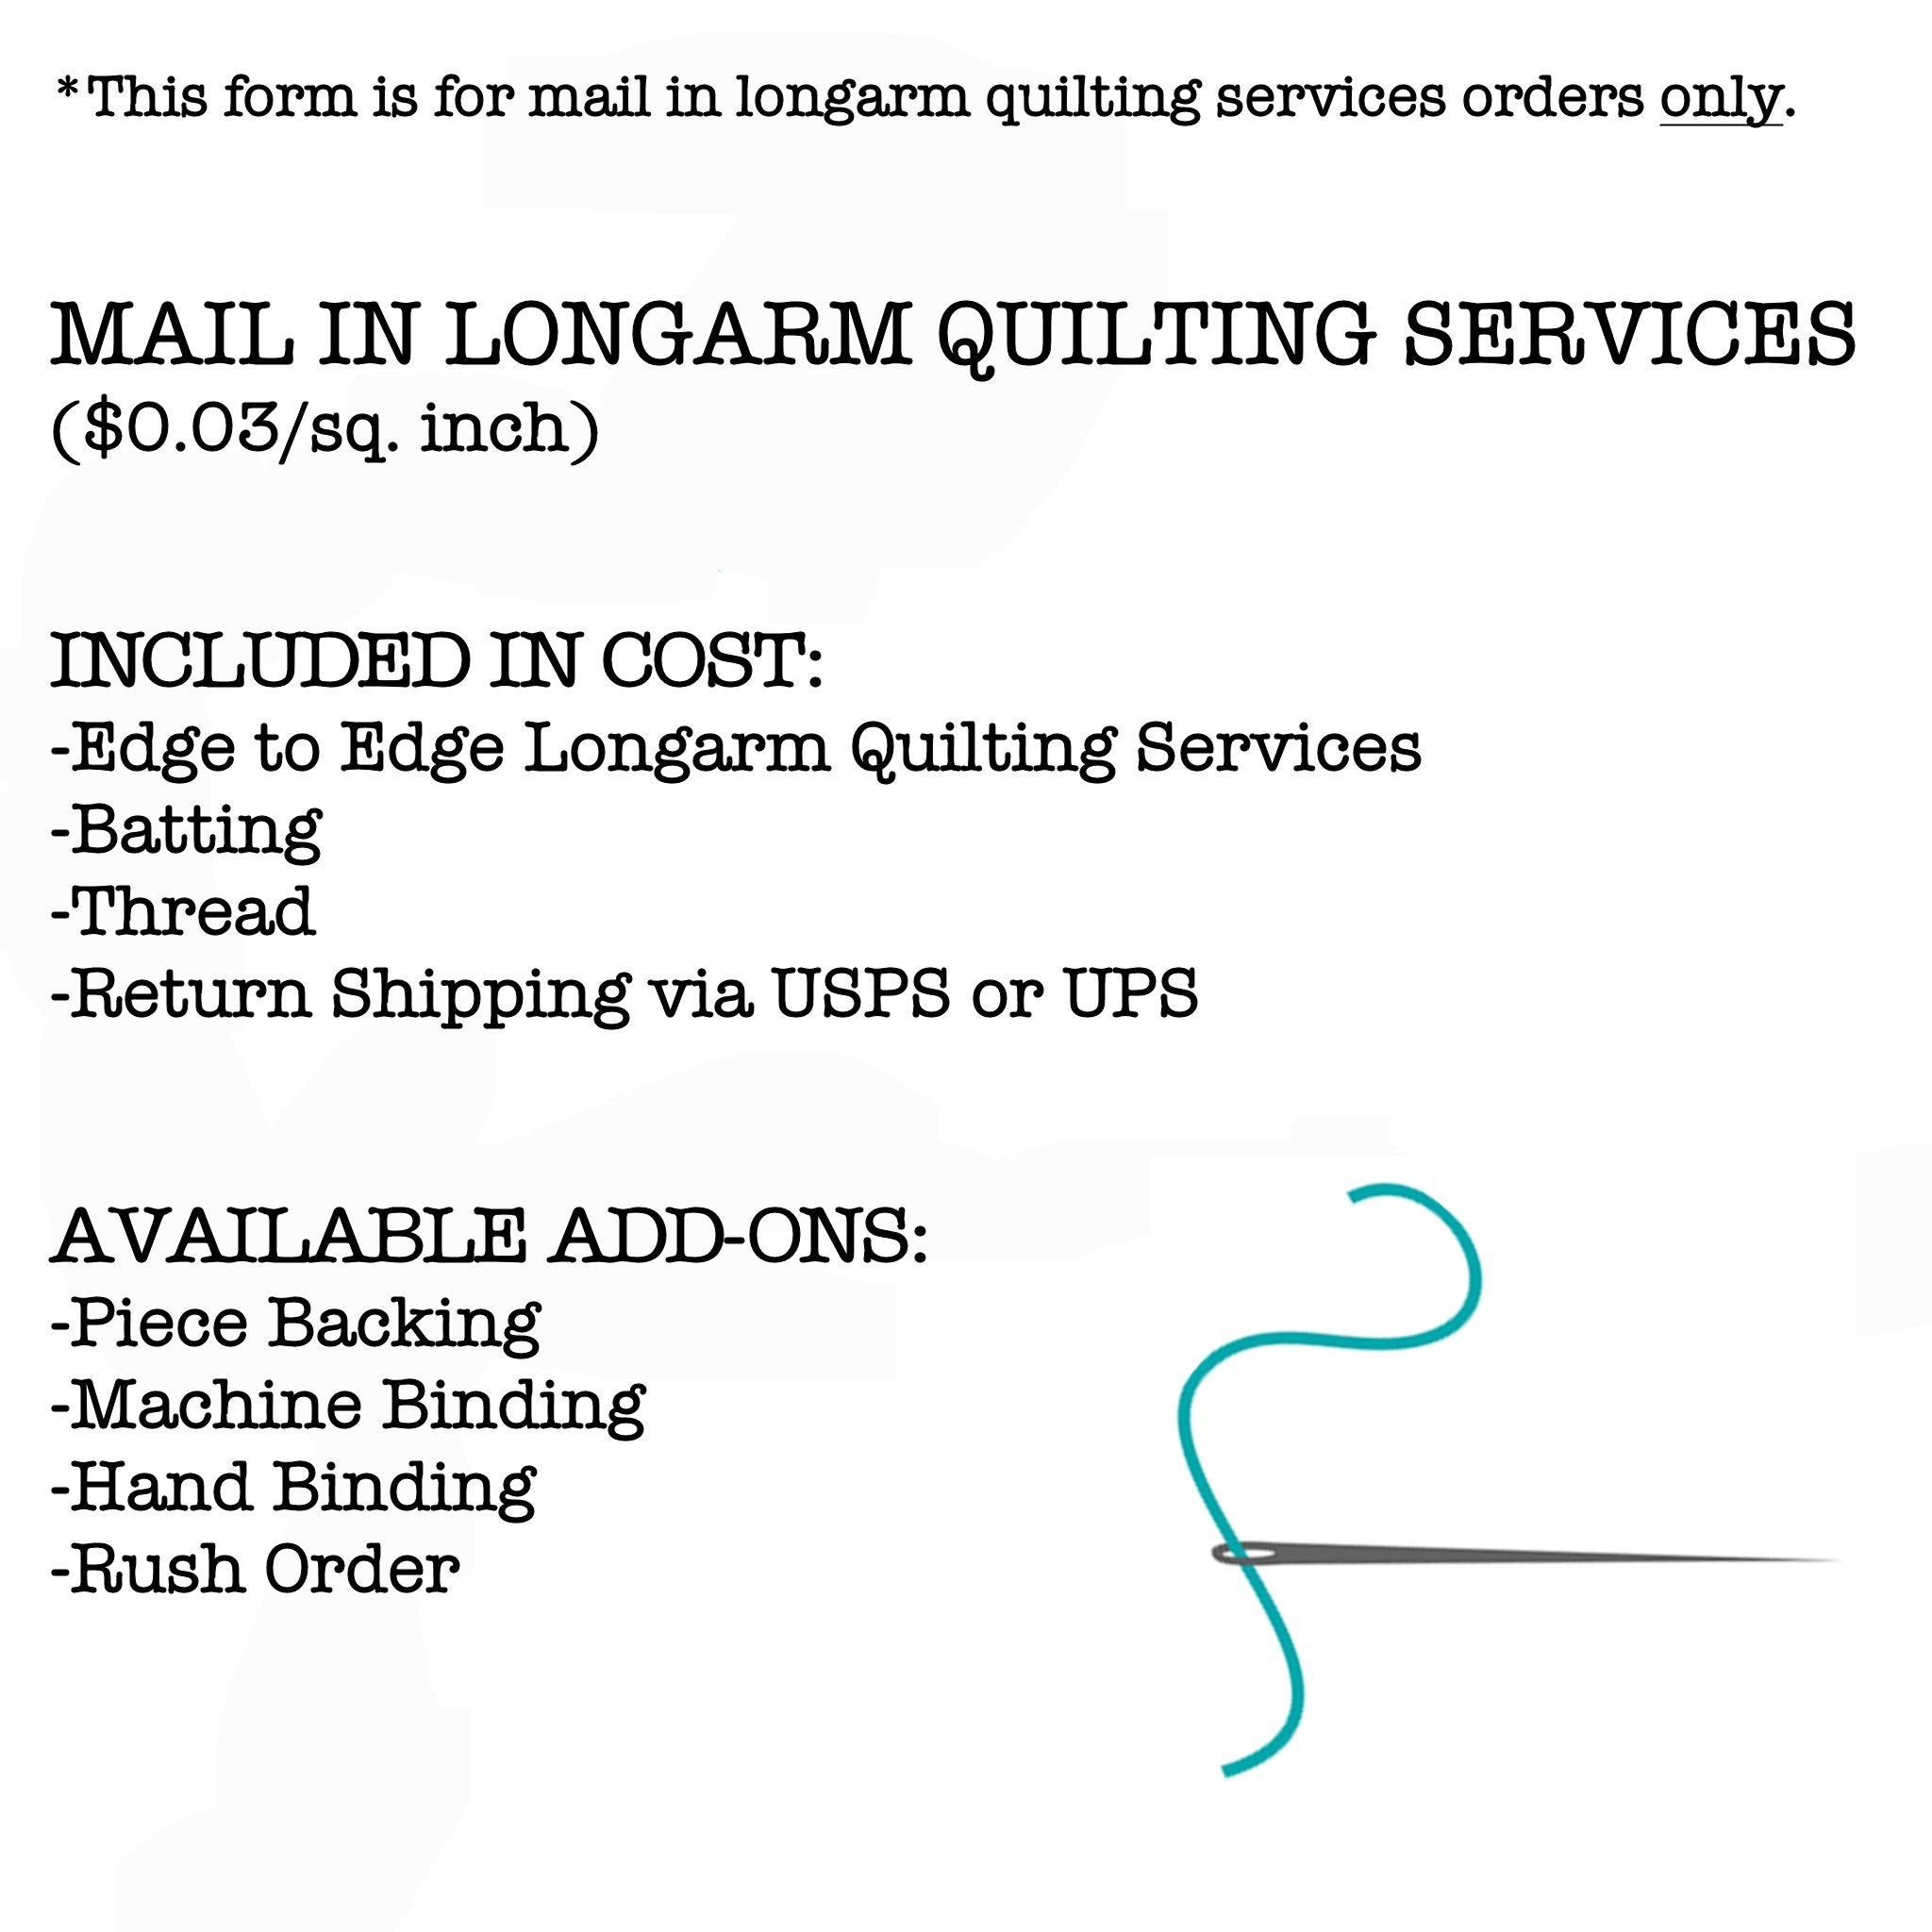 Mail in Edge to Edge Longarm Quilting Services - On Pins & Needles Quilting Co.